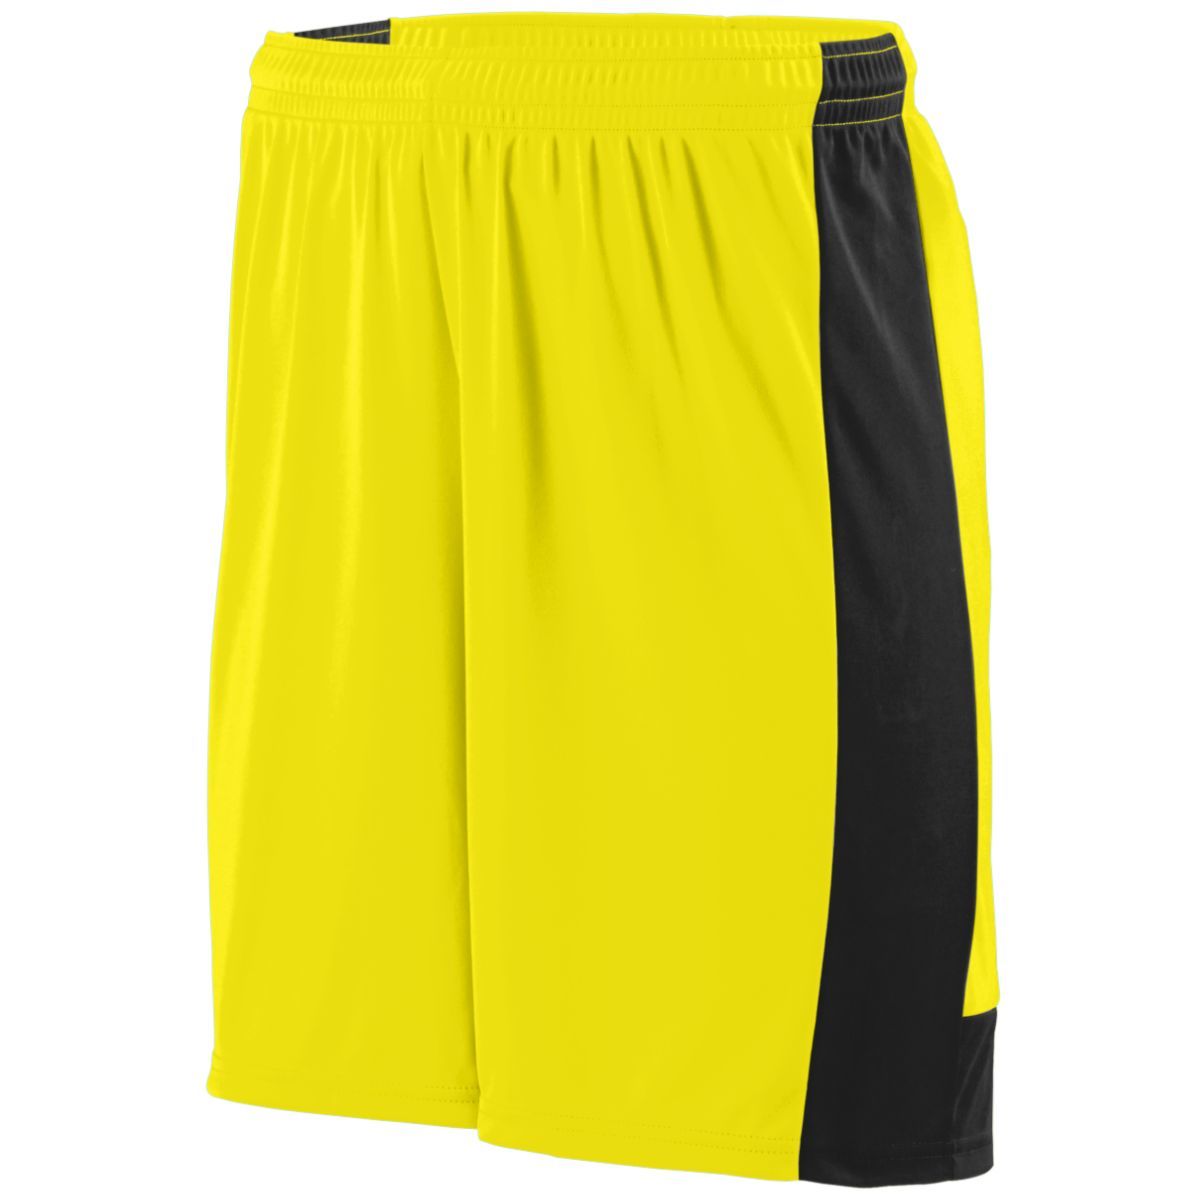 Augusta Sportswear Youth Lightning Shorts in Power Yellow/Black  -Part of the Youth, Youth-Shorts, Augusta-Products, Soccer, All-Sports-1 product lines at KanaleyCreations.com